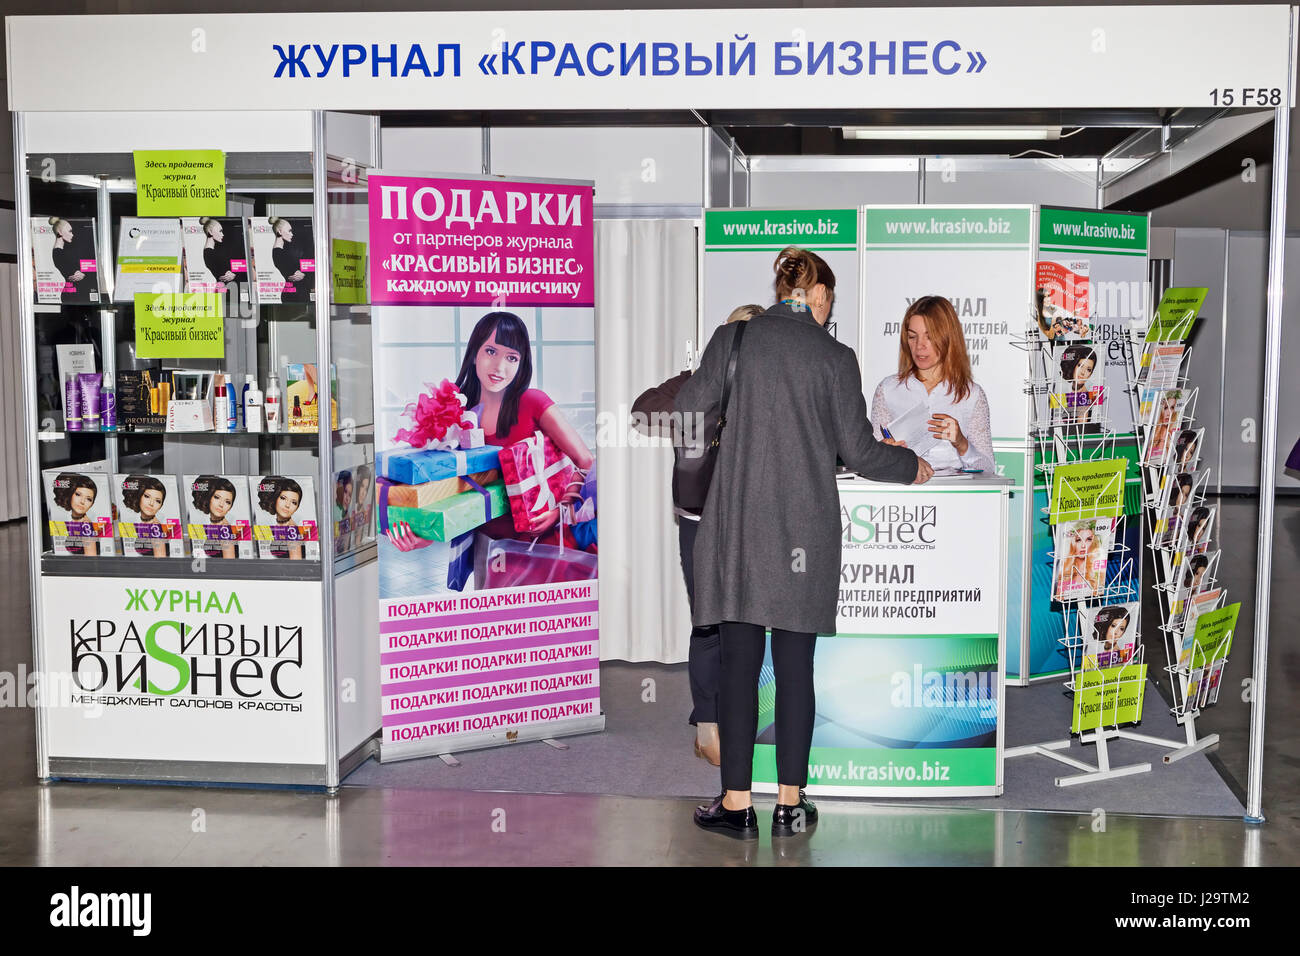 Moscow, Russian Federation - April 21, 2017: Intercharm XVI International exhibition of professional cosmetics and equipment for beauty salons Stock Photo